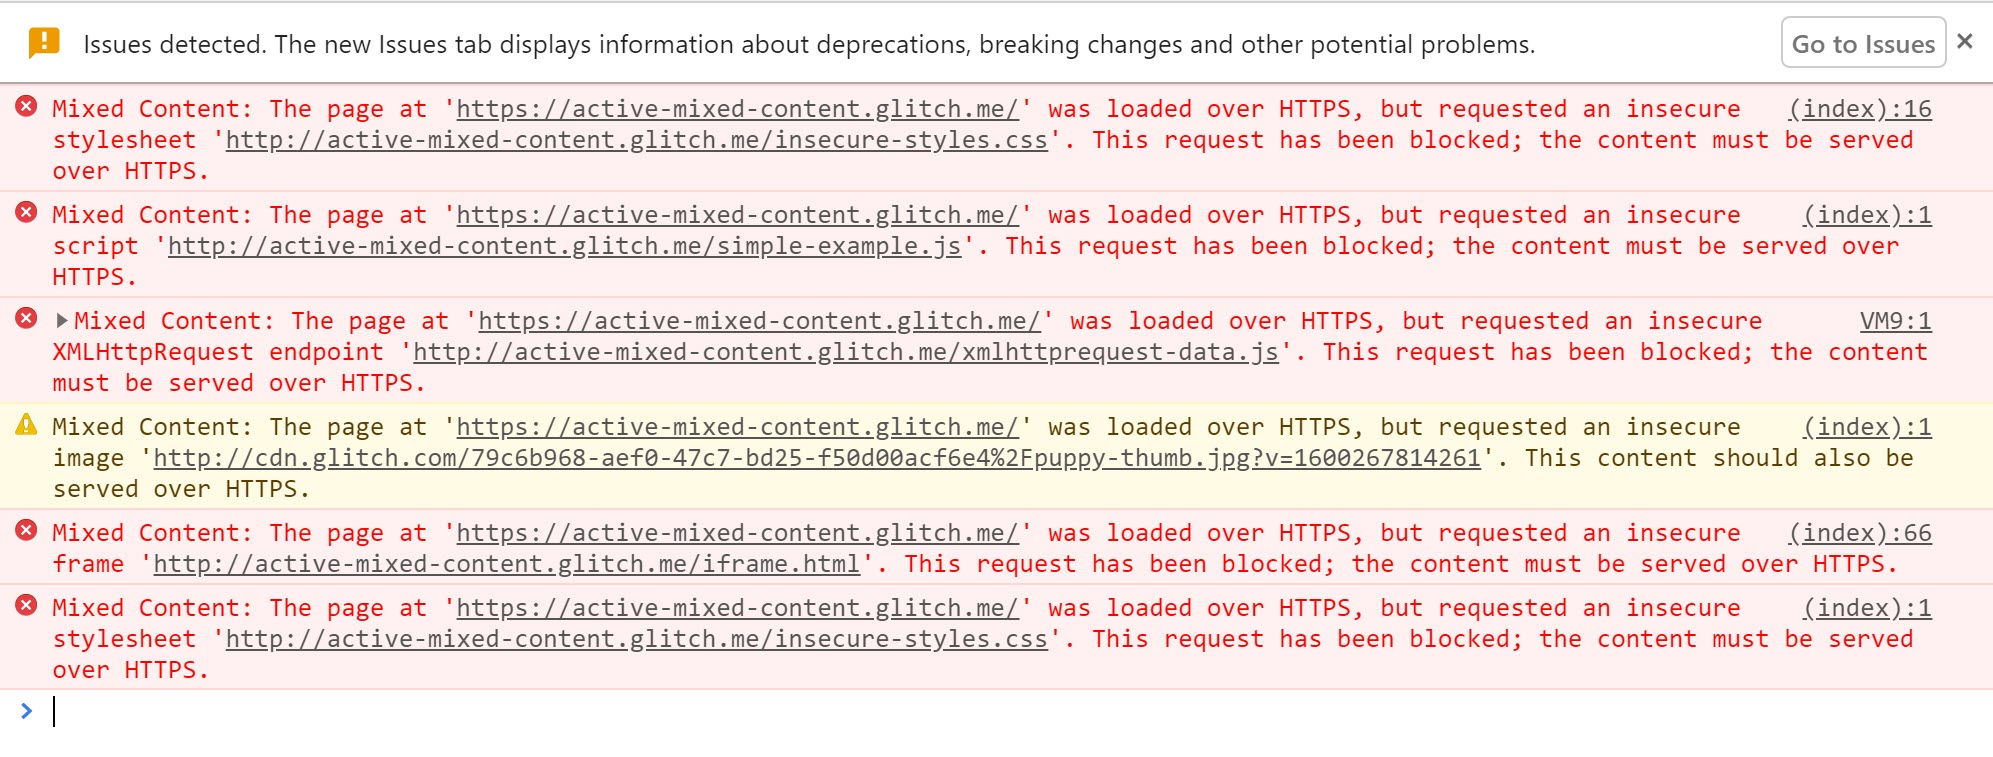 Chrome DevTools showing the warnings displayed when active mixed content is blocked